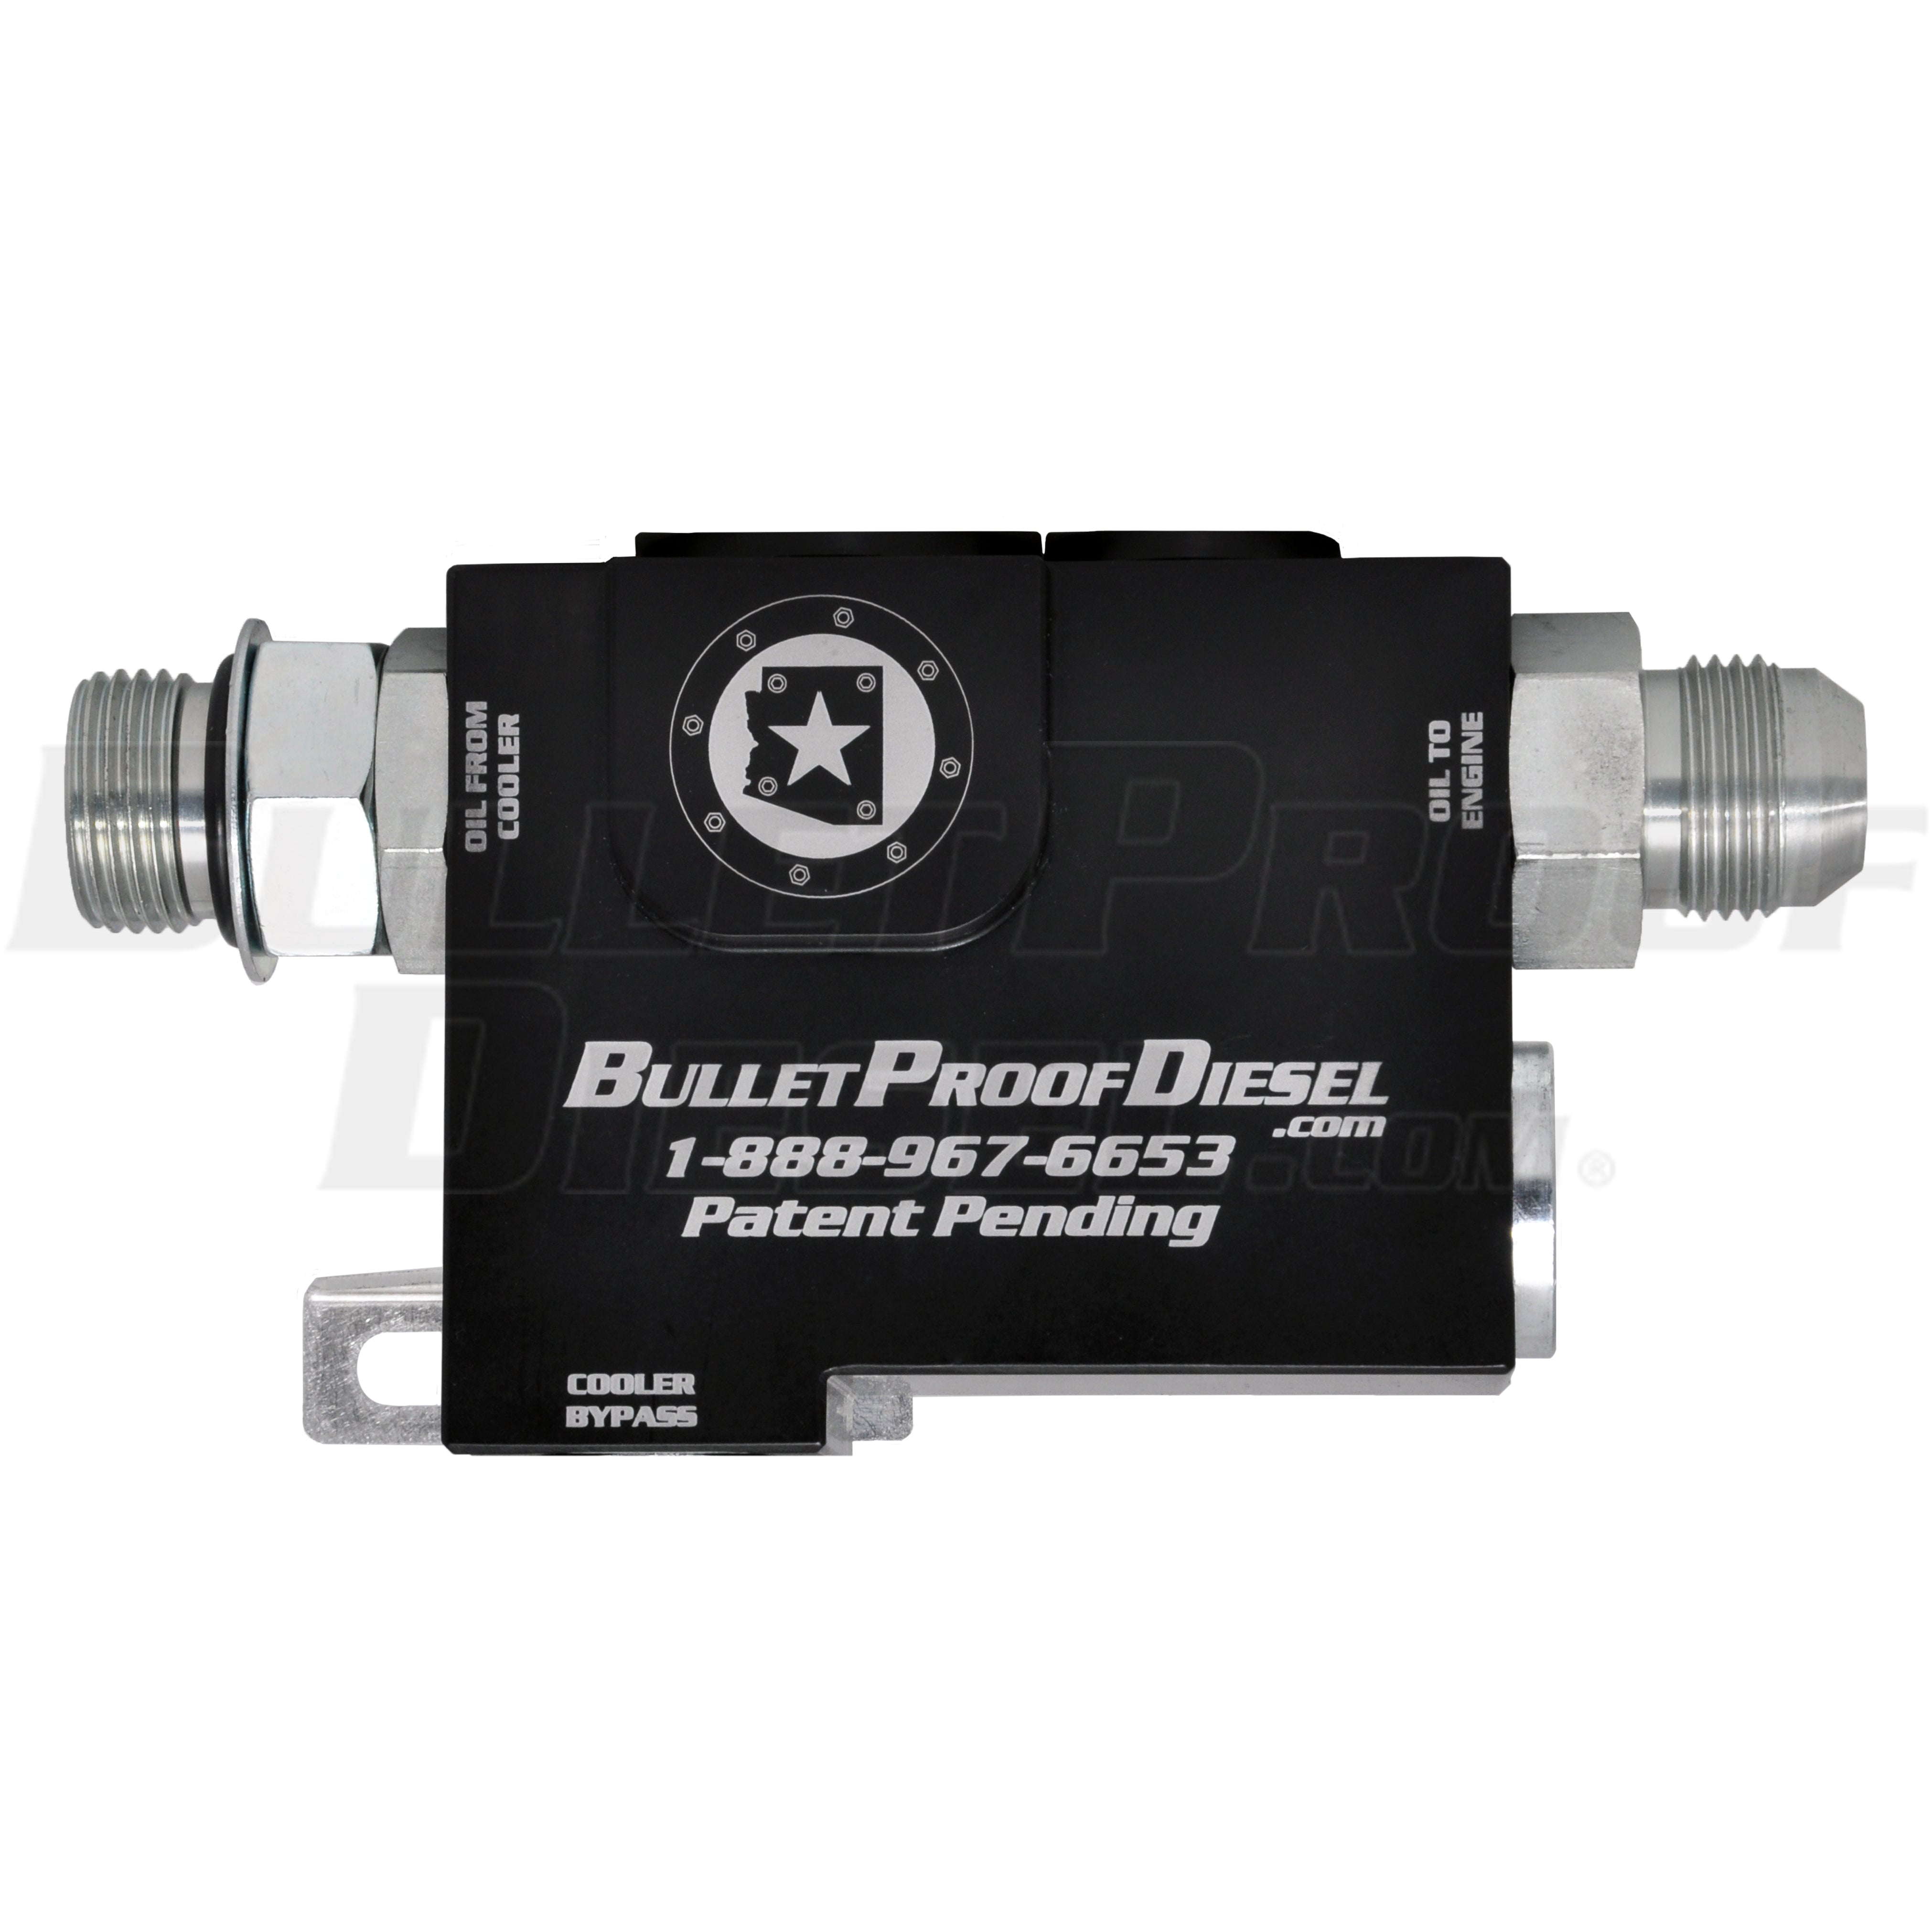 BulletProof Engine Oil System Upgrade 2003-2004 - Upgraded Oil Filtration - Heavy-Duty Air/Oil Cooling; Designed for All Climates